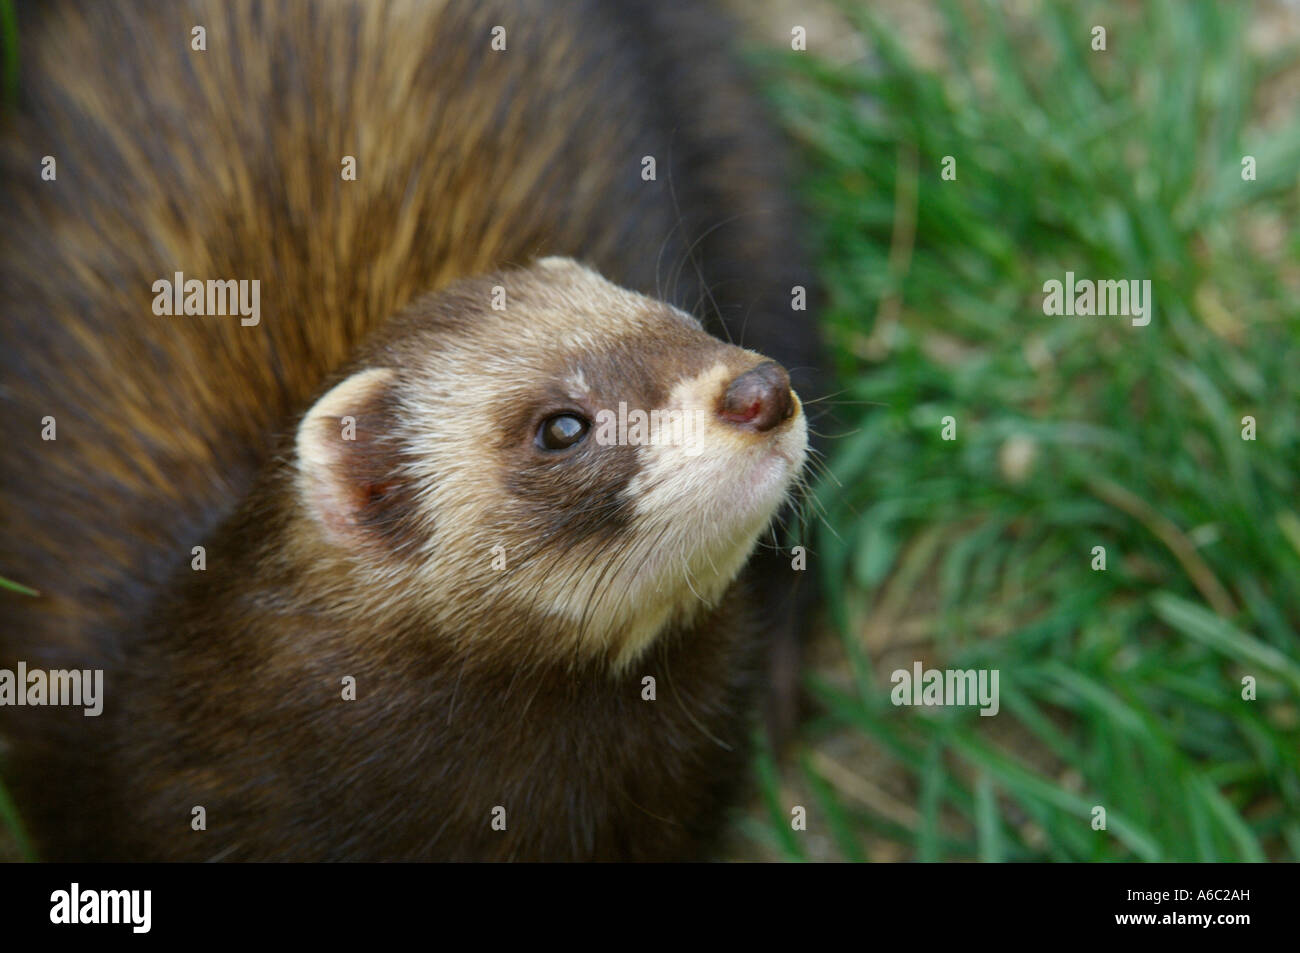 Polecats are nocturnal mustelids that hunt rodents, frogs etc .  They are closely related to ferrets. British Wildlife Centre Stock Photo